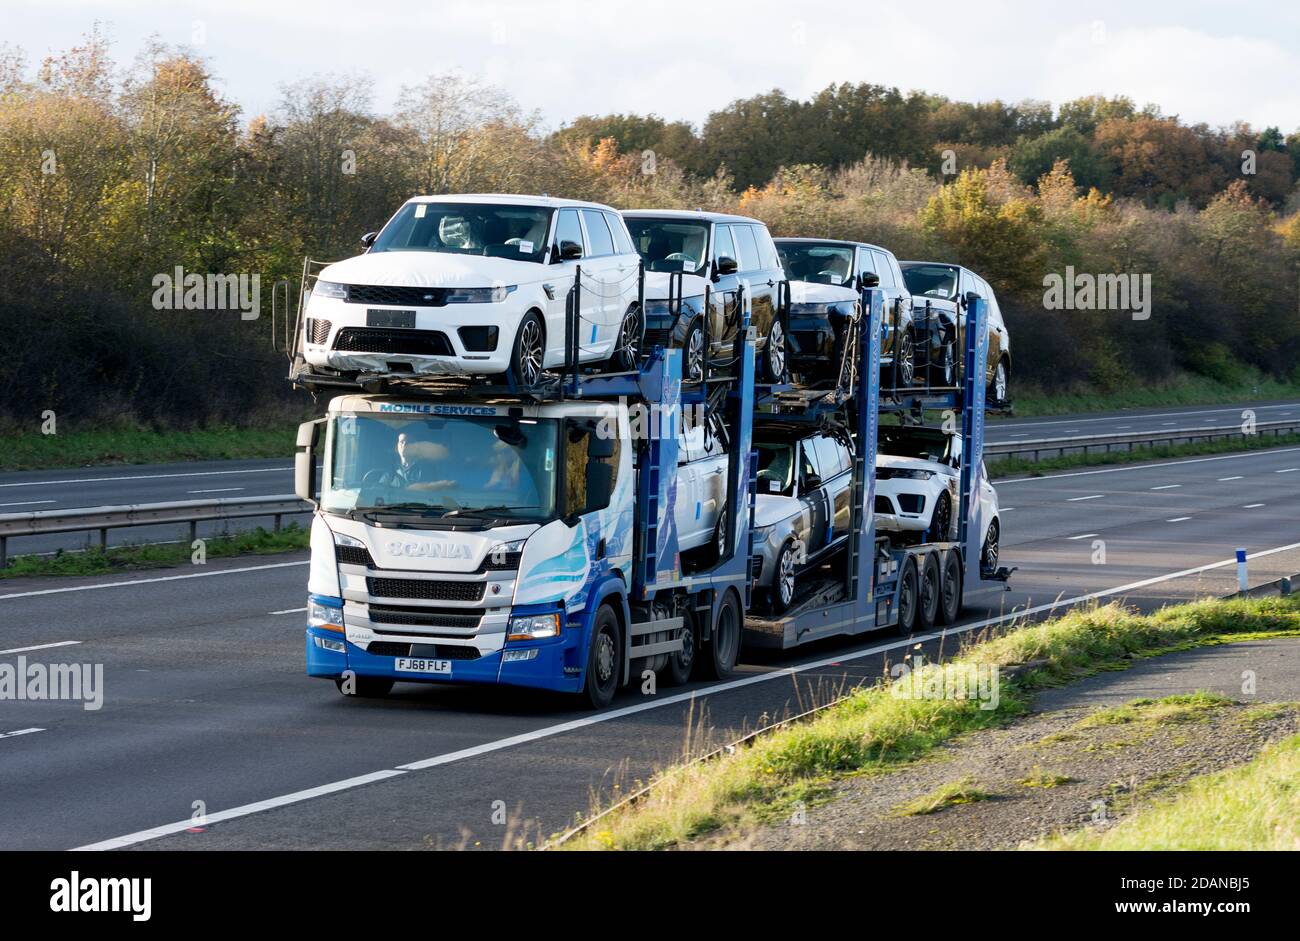 A Mobile Services transporter lorry carrying new Land Rover cars on the M40 motorway, Warwickshire, UK Stock Photo